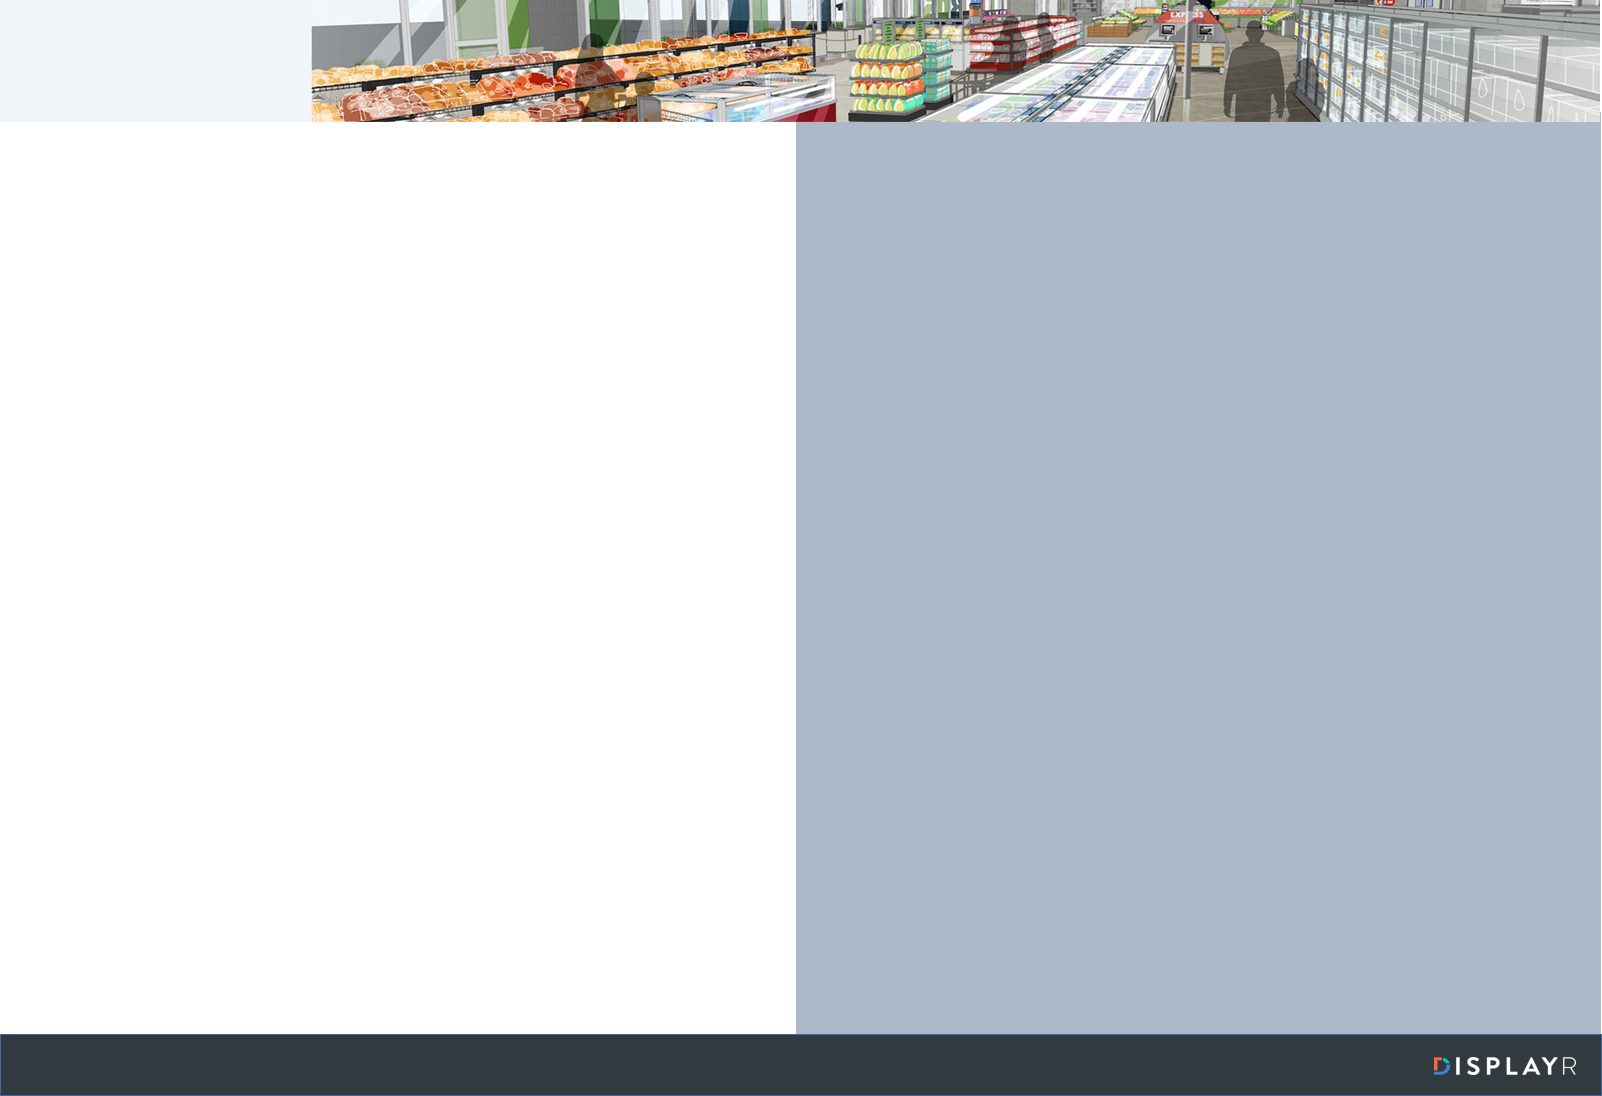 ShoppingBackground.png